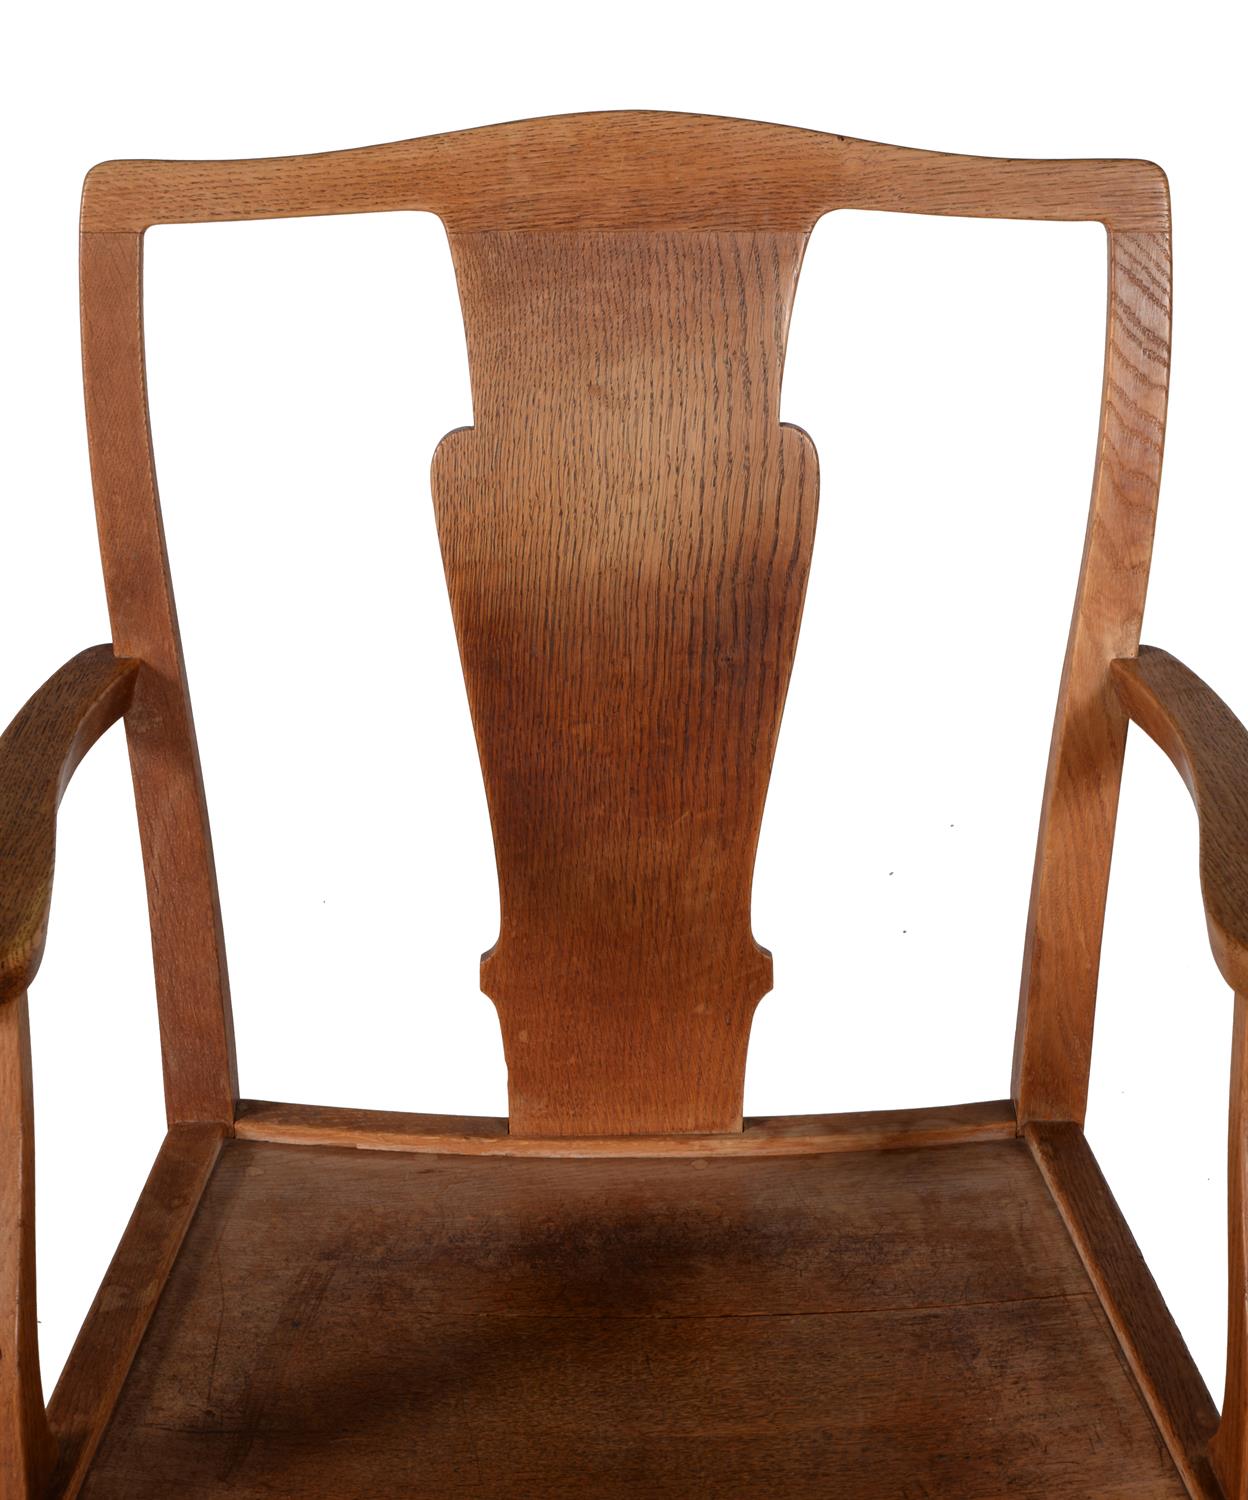 A pair of oak open armchairs, , by Heal's - Image 2 of 4